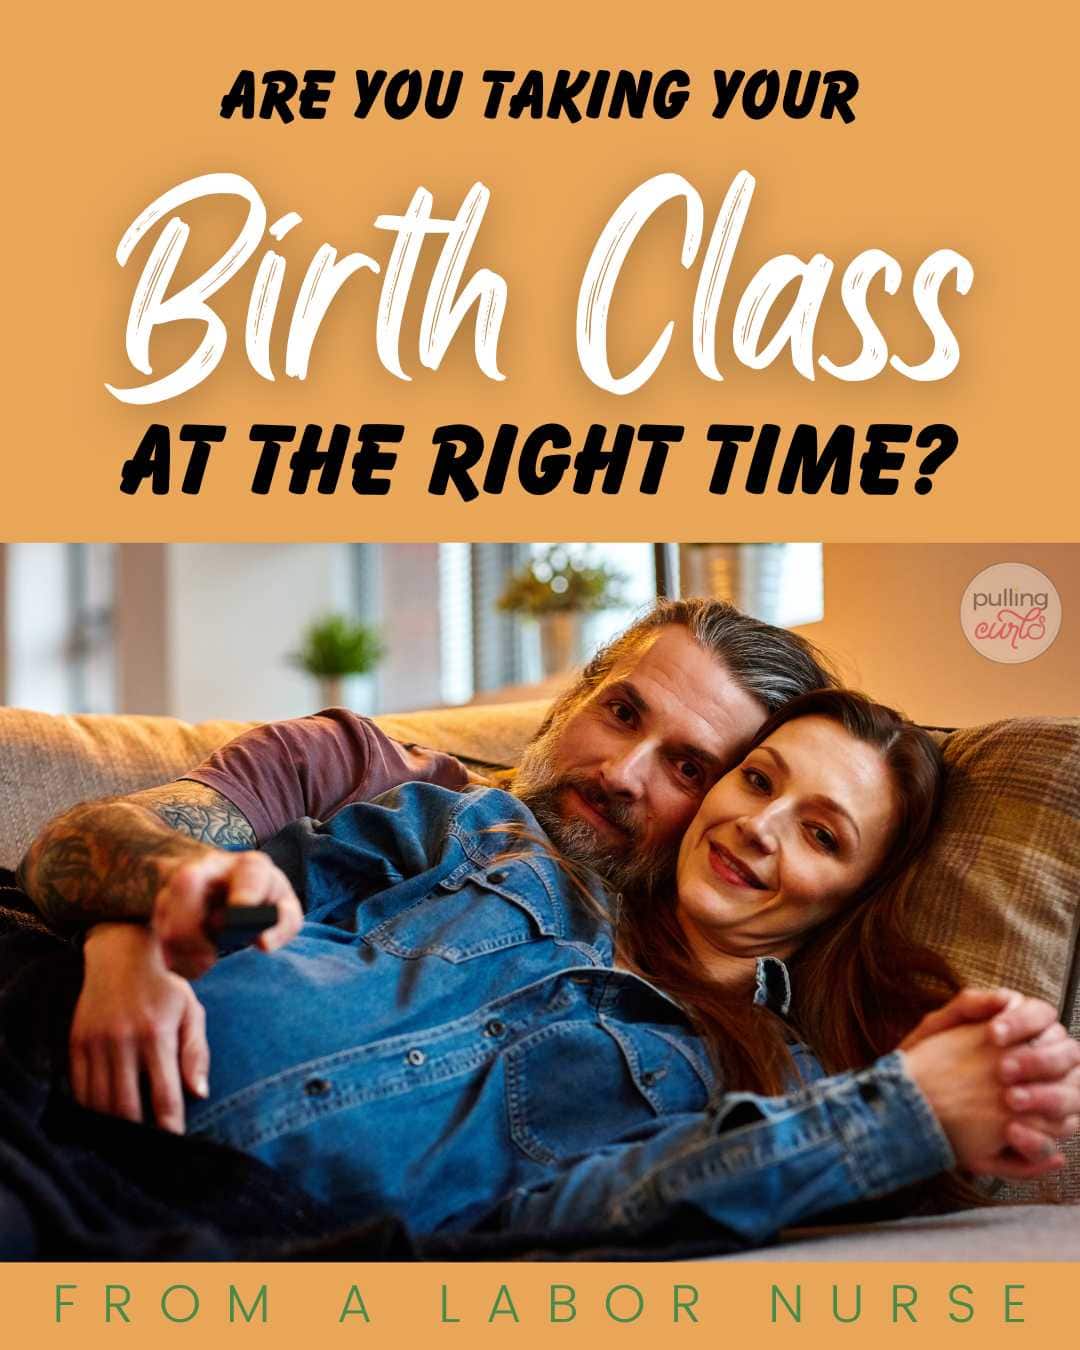 Childbirth classes are a great way to help prepare expectant parents for the birth of their baby. Whether it's your first child or your fourth, attending childbirth classes may leave you feeling better prepared for the big day. With the right knowledge and support, you can ensure that you and your baby have a safe and healthy birth. But when is the best time to start taking classes? via @pullingcurls